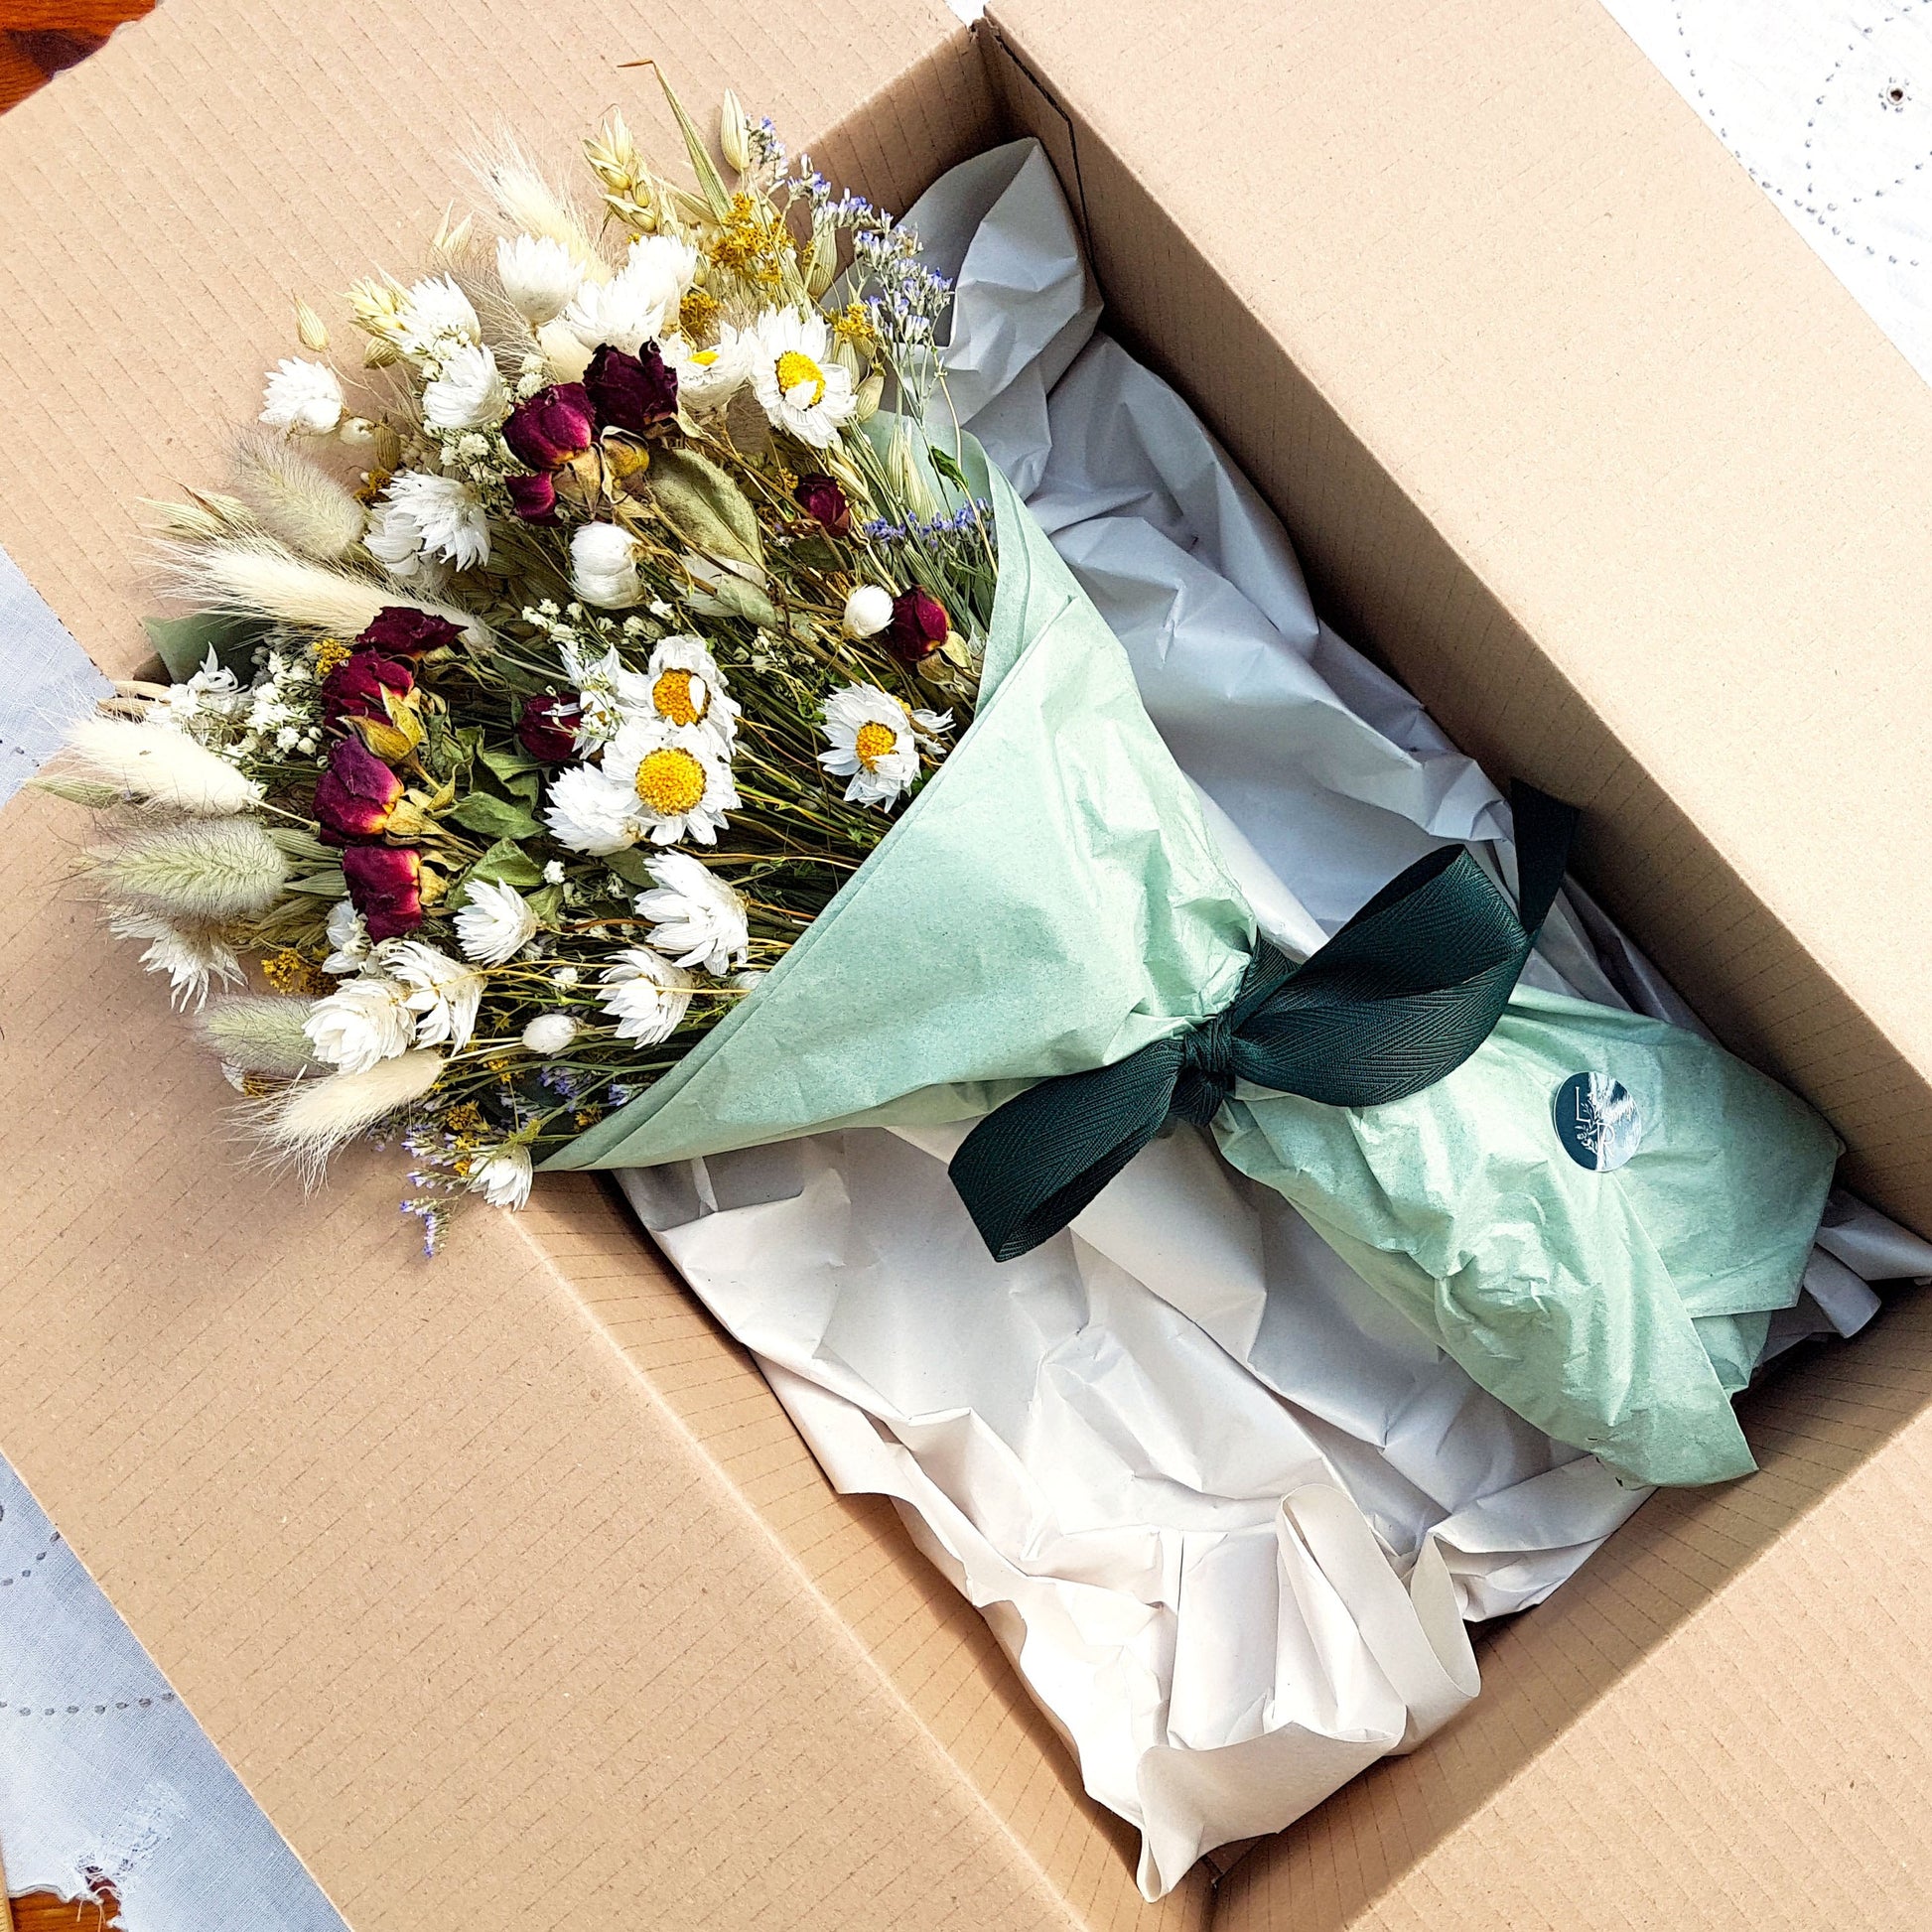 A close up of the dried flower bouquet wrapped sits in its packaging box with a pretty recycled tissue layer. It has small deep red roses, white daisies with yellow centres, lilac sea lavender and pretty white gypsophila among other grasses and fillers. In the background you can see the optional gift card and instructions for caring for dried flowers.